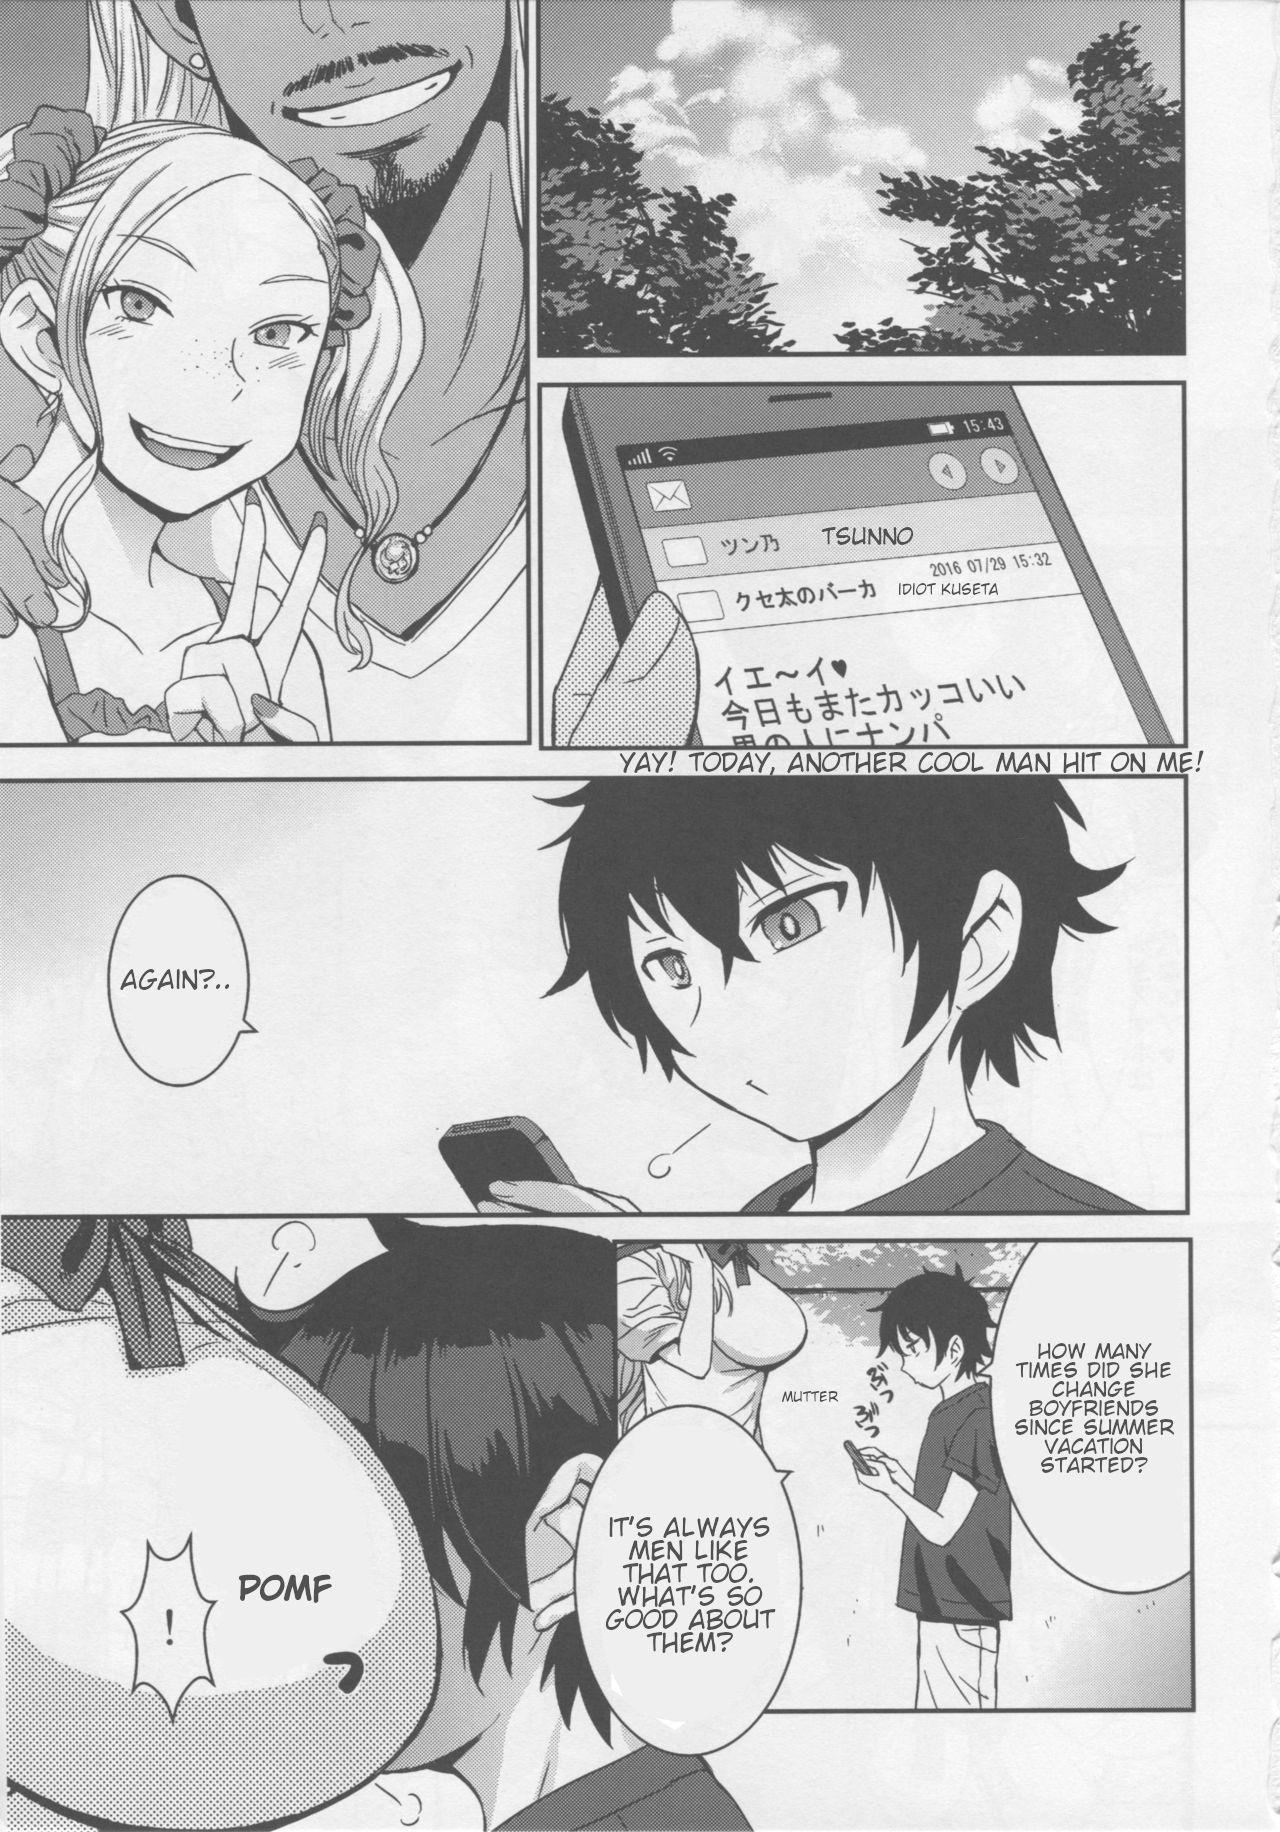 Aunt Boy Meets Gal - Oshiete galko-chan Cheat - Page 2